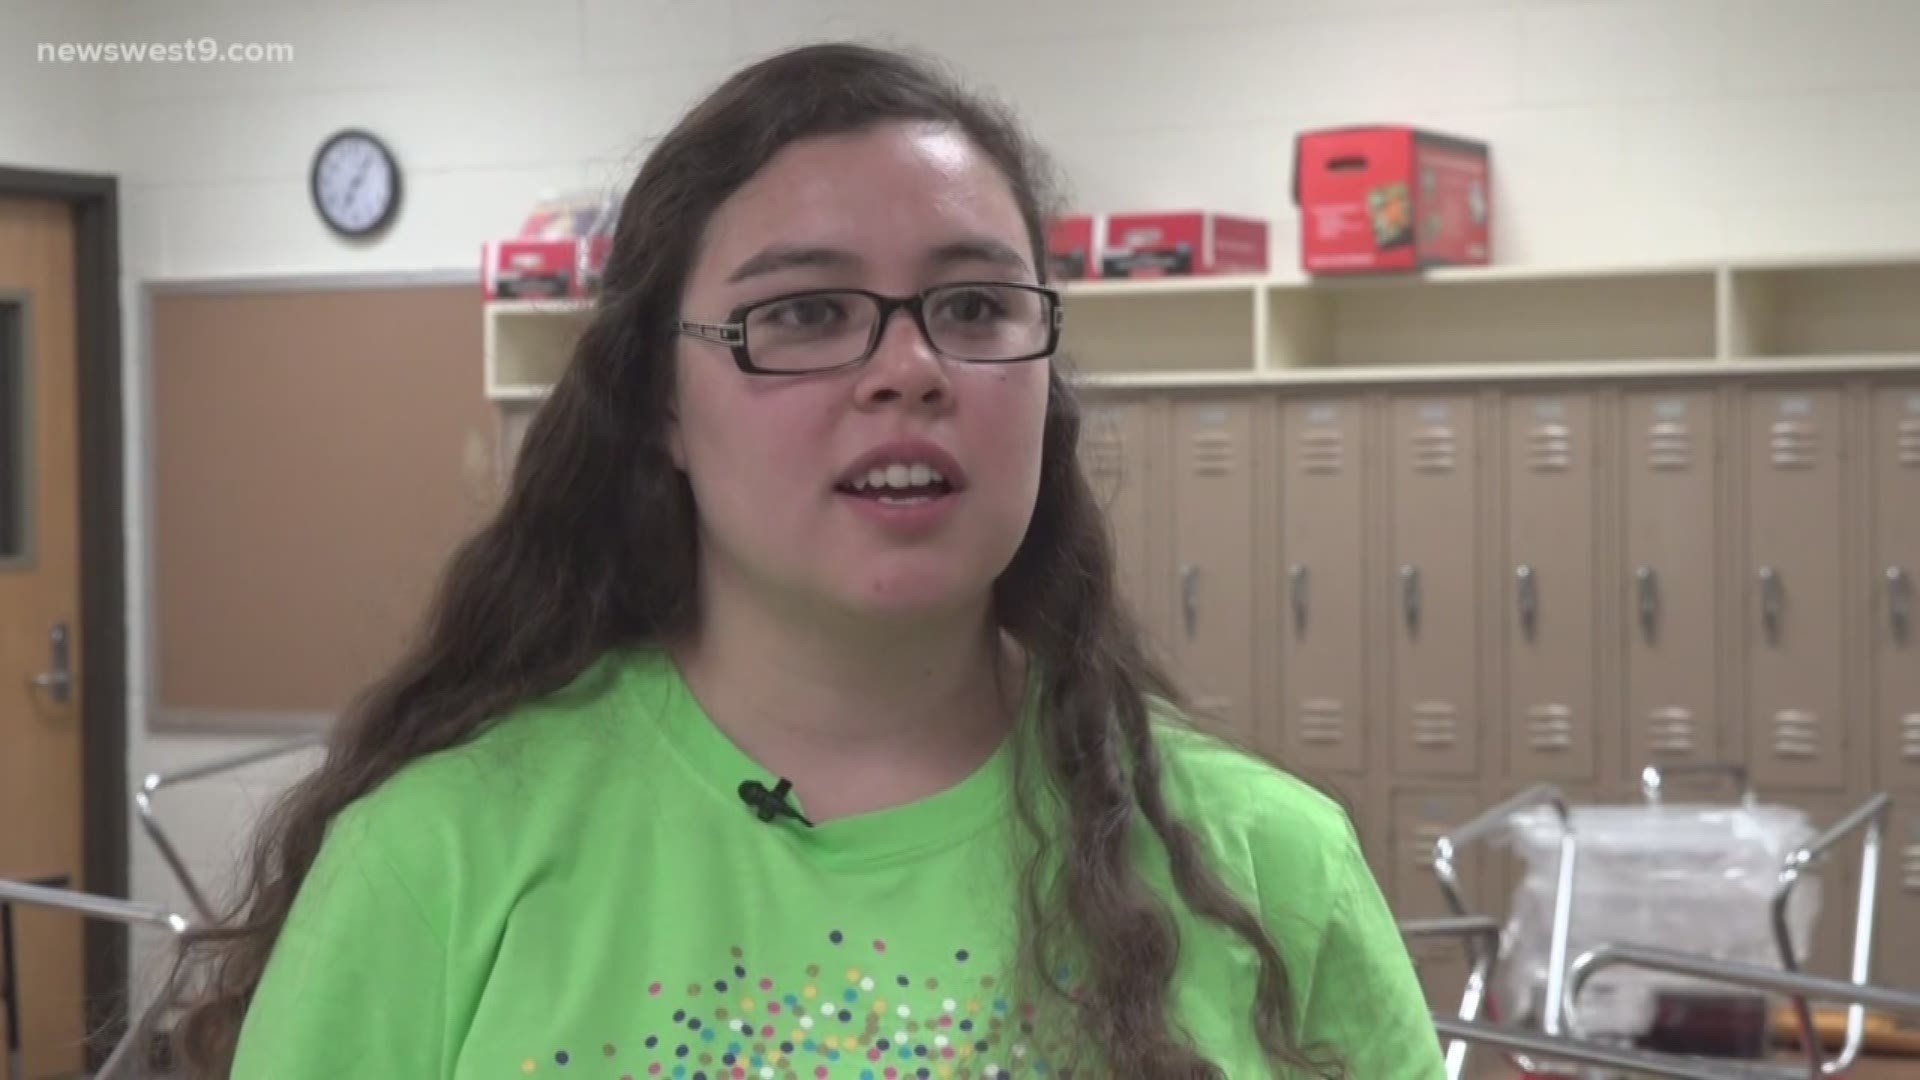 A second grade teacher at Ector County ISD used social media to make her dreams come true.